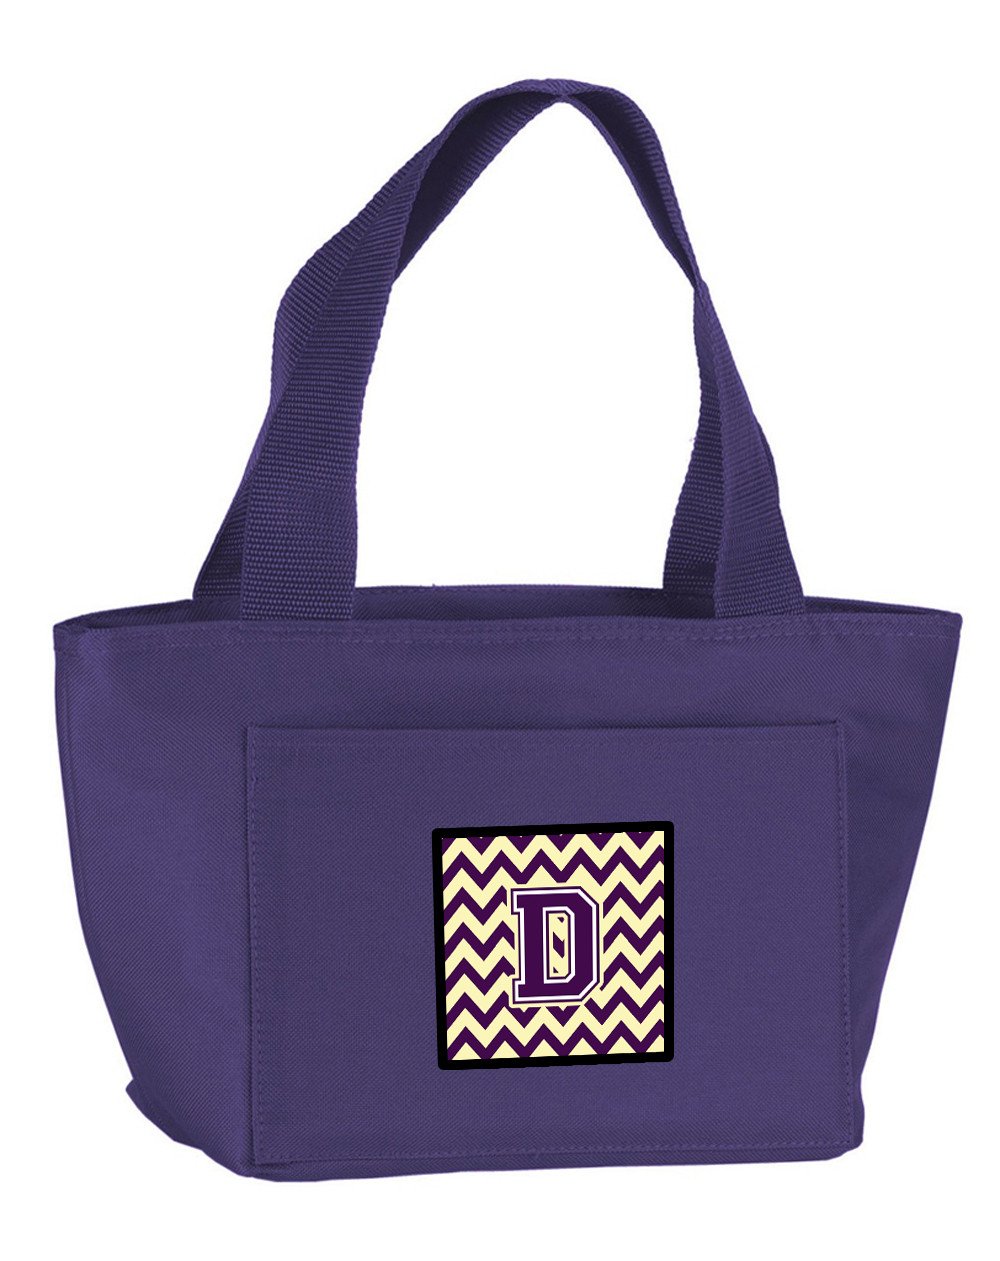 Letter D Chevron Purple and Gold Lunch Bag CJ1058-DPR-8808 by Caroline's Treasures